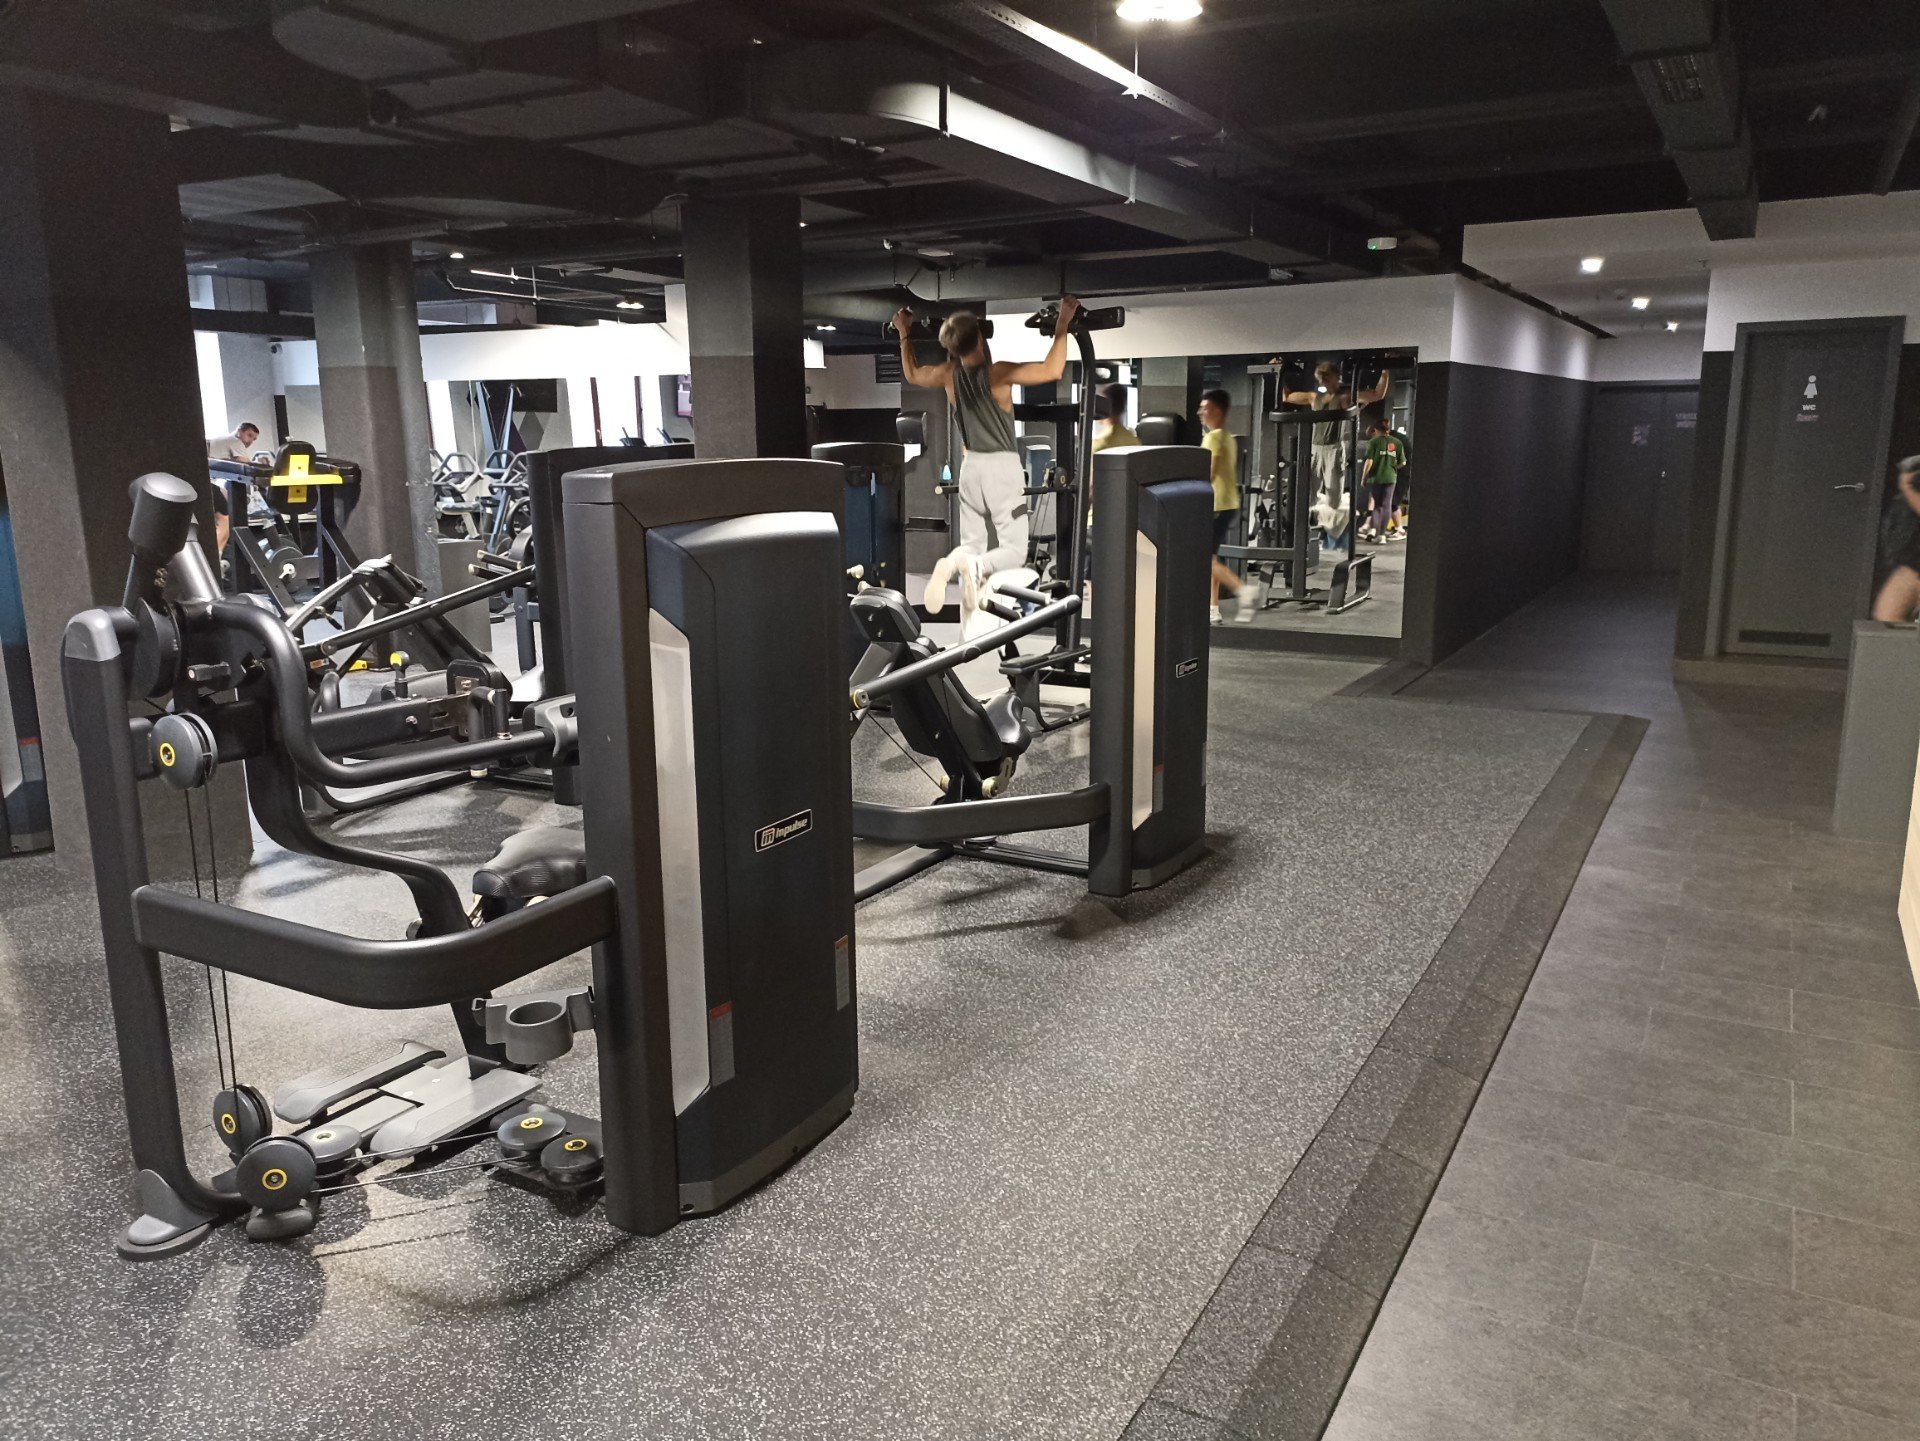  VICTORY FITNESS OC PLAZA project, with the GELSPORT FIT PUZZLE panels of the GELPO company